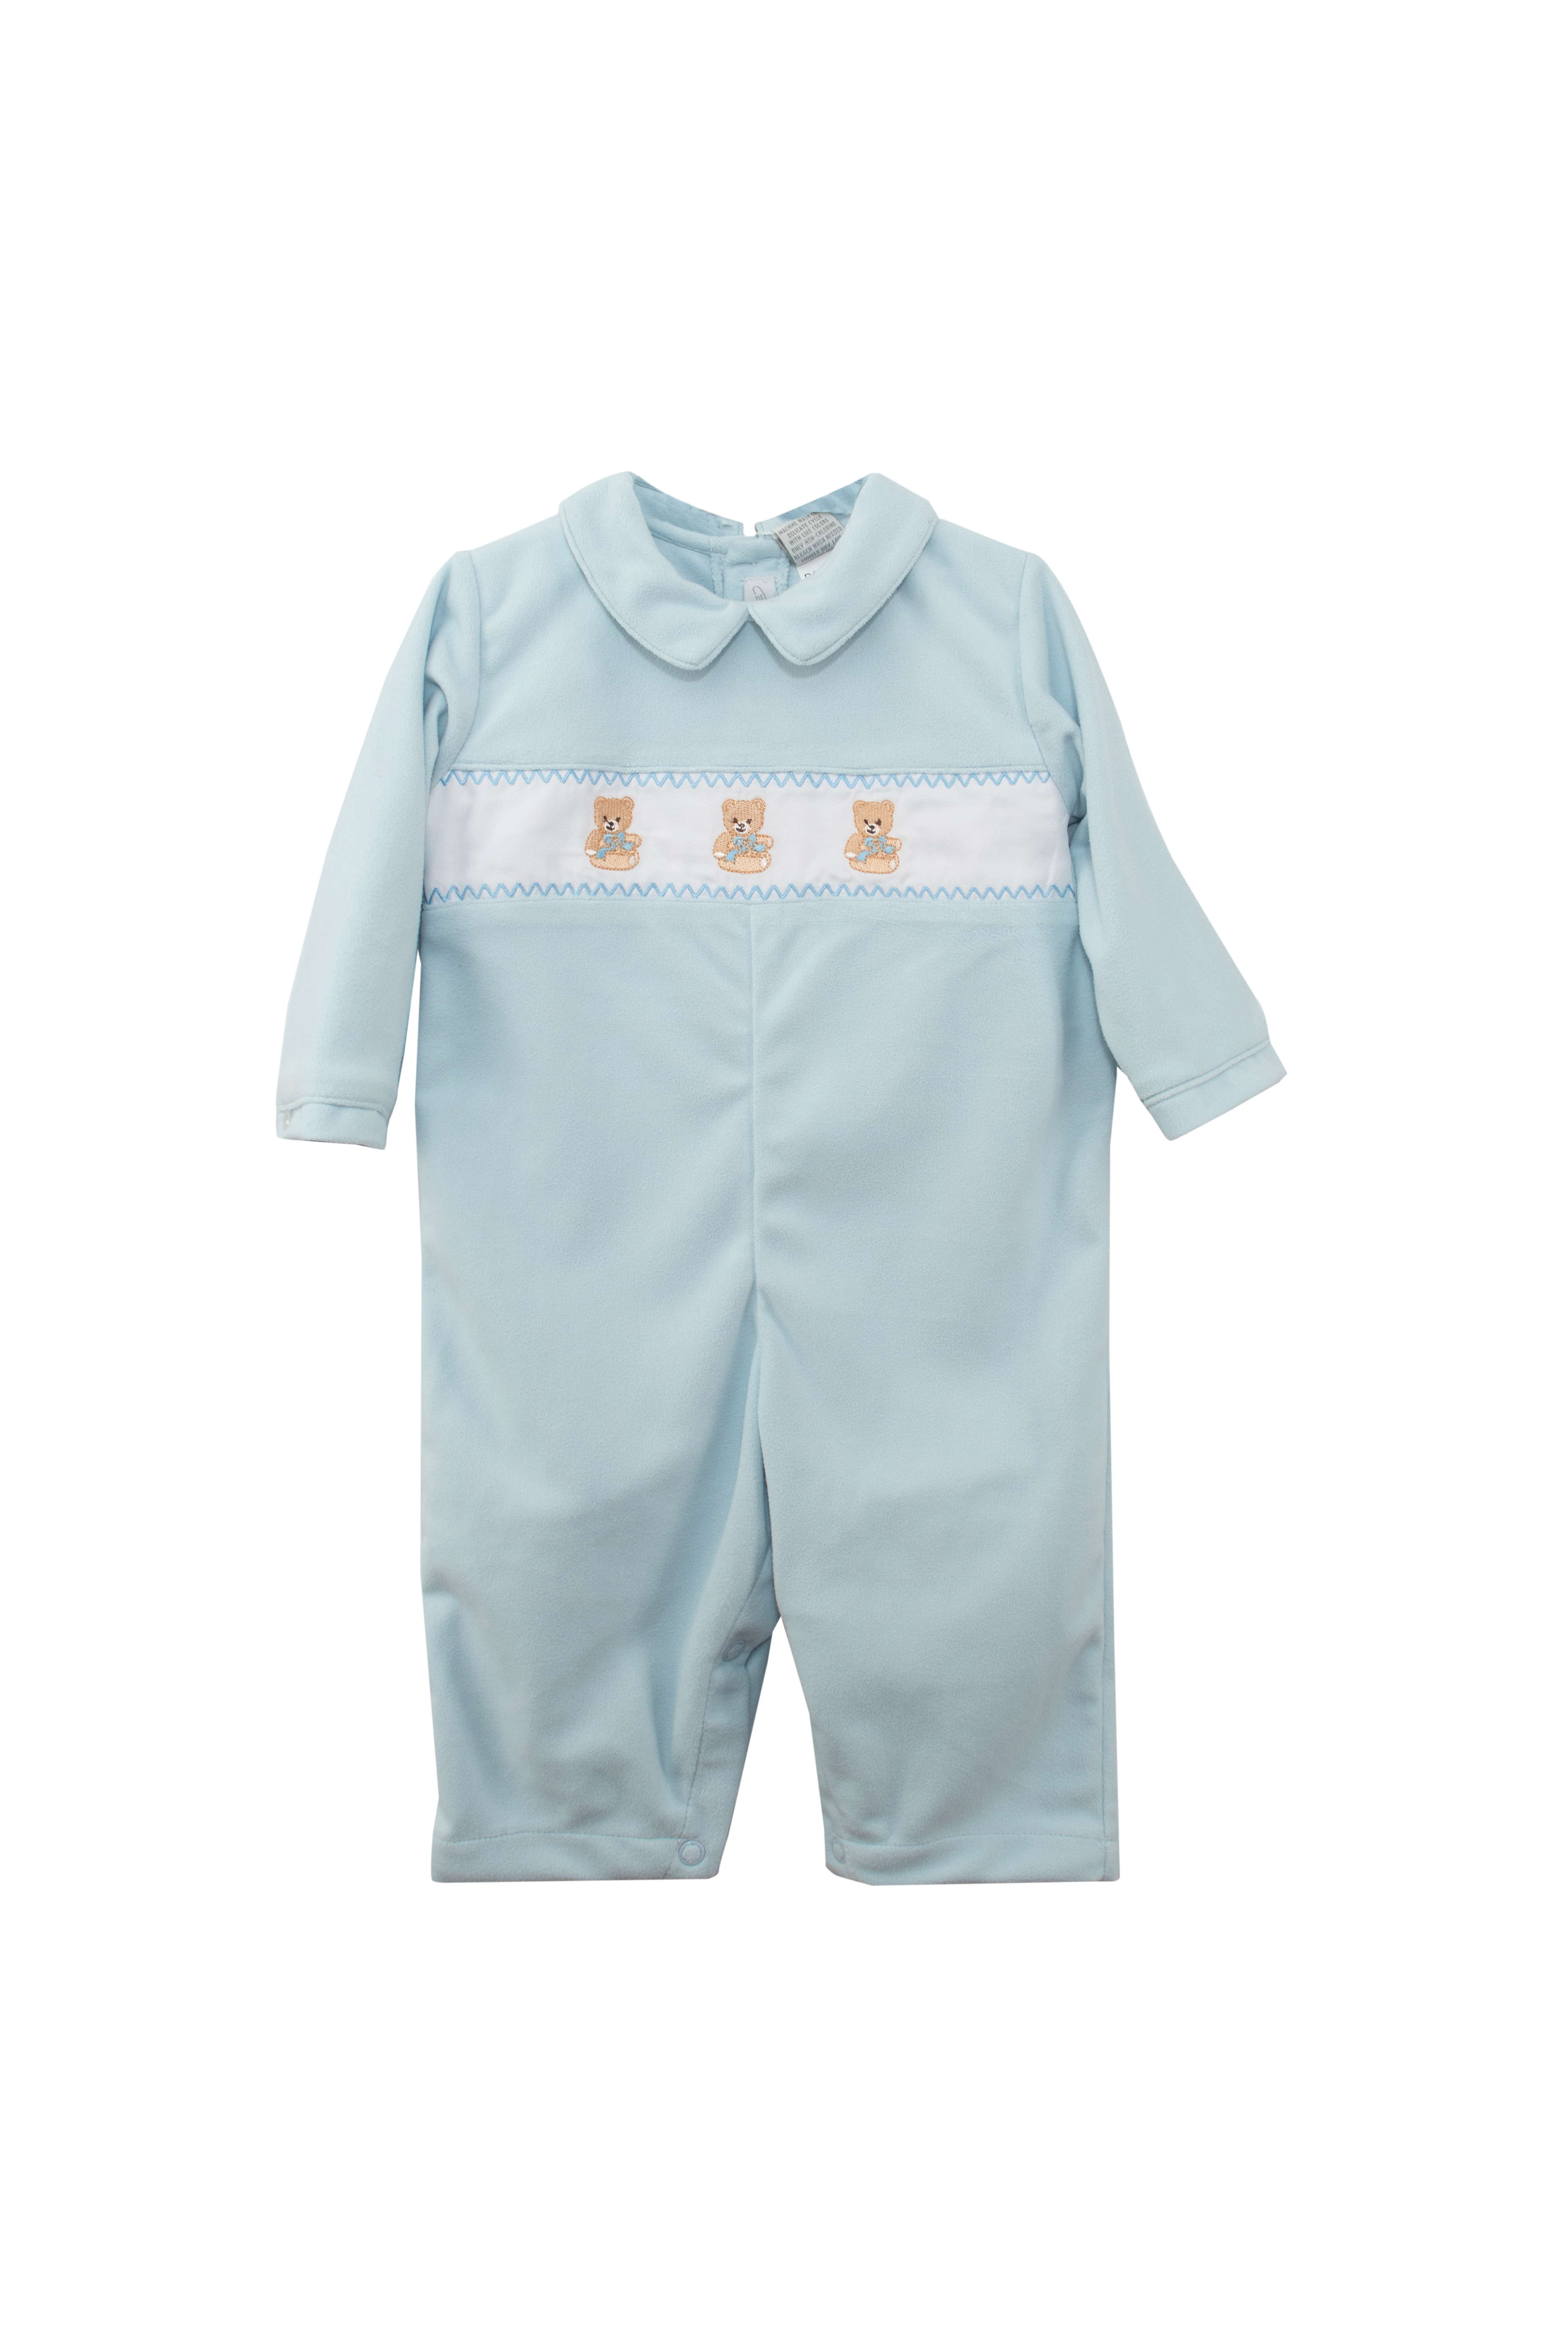 20236-Carriage Boutique Smocked Teddy Bear Blue Baby Boy Longall